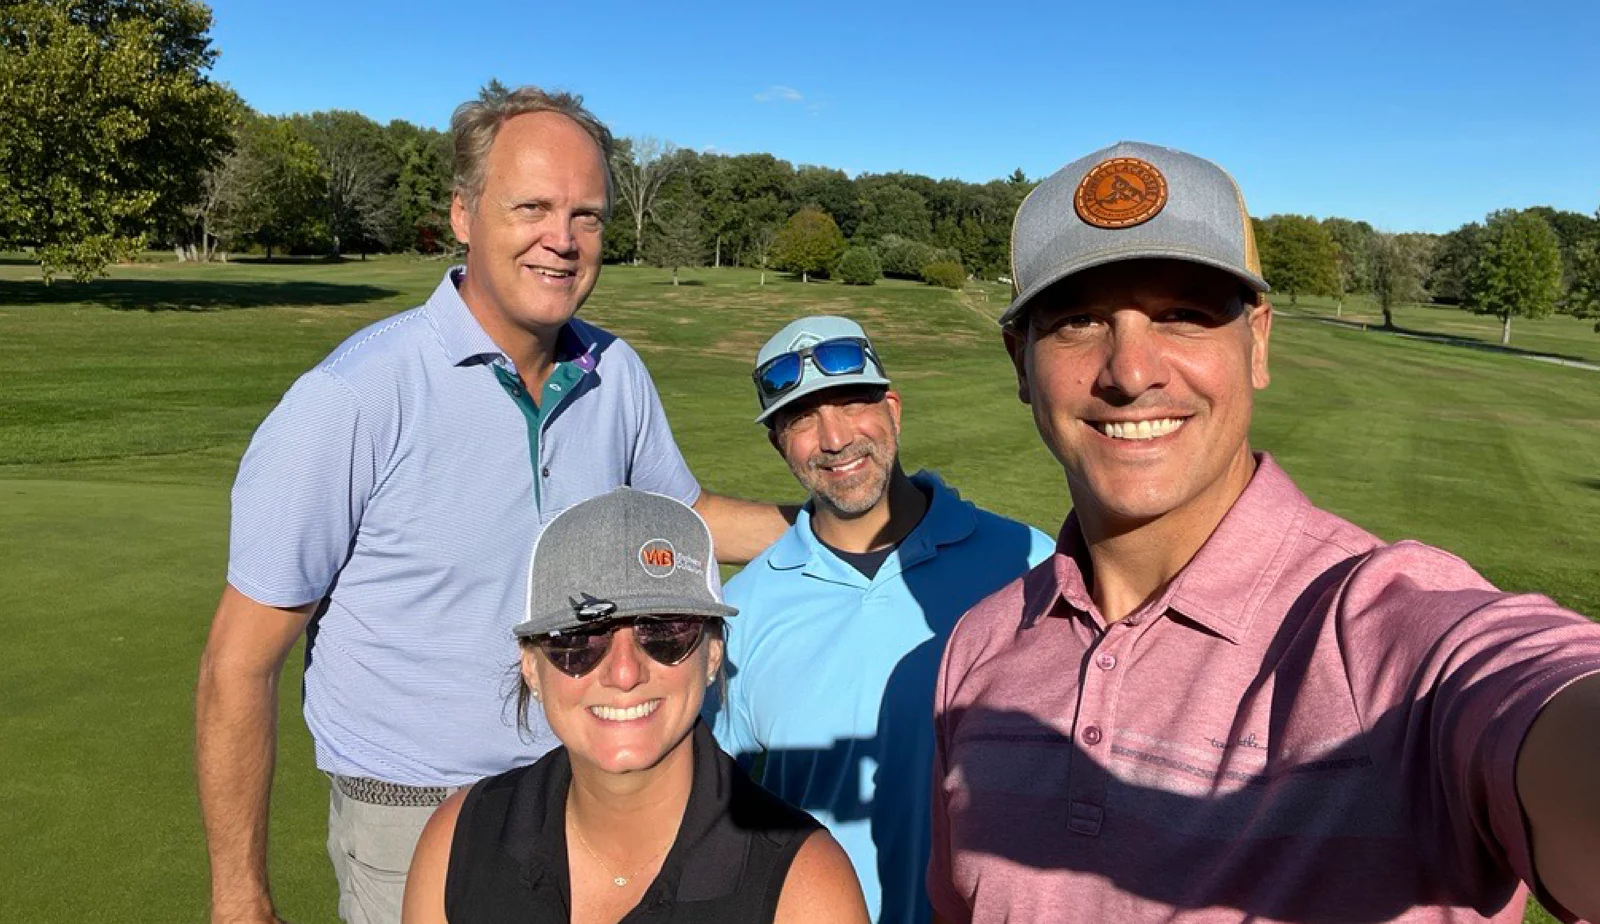 Our Boston team enjoying a beautiful day at their annual golf outing 2022/11/Boston-Golf-Outing.png 